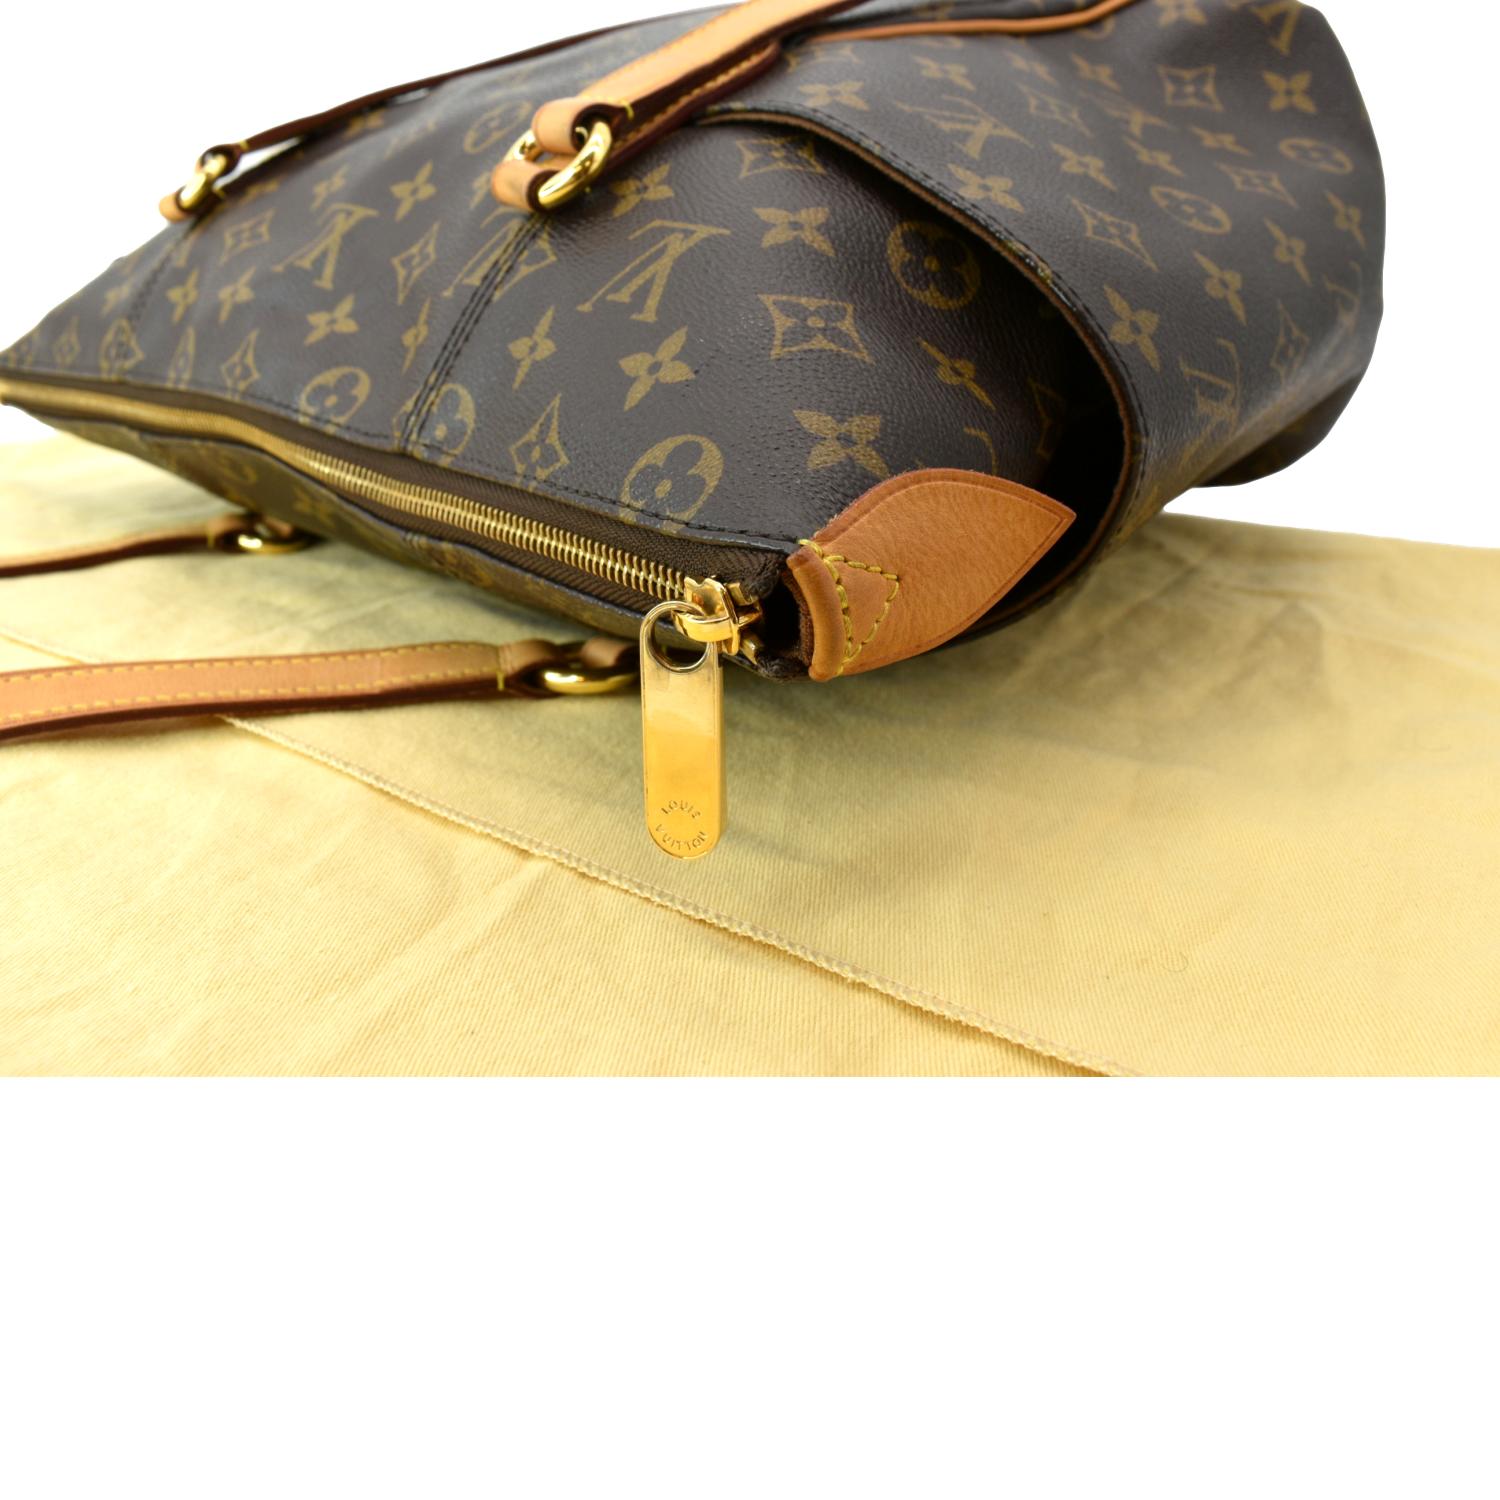 Louis Vuitton Pre-owned Women's Fabric Shoulder Bag - Brown - One Size